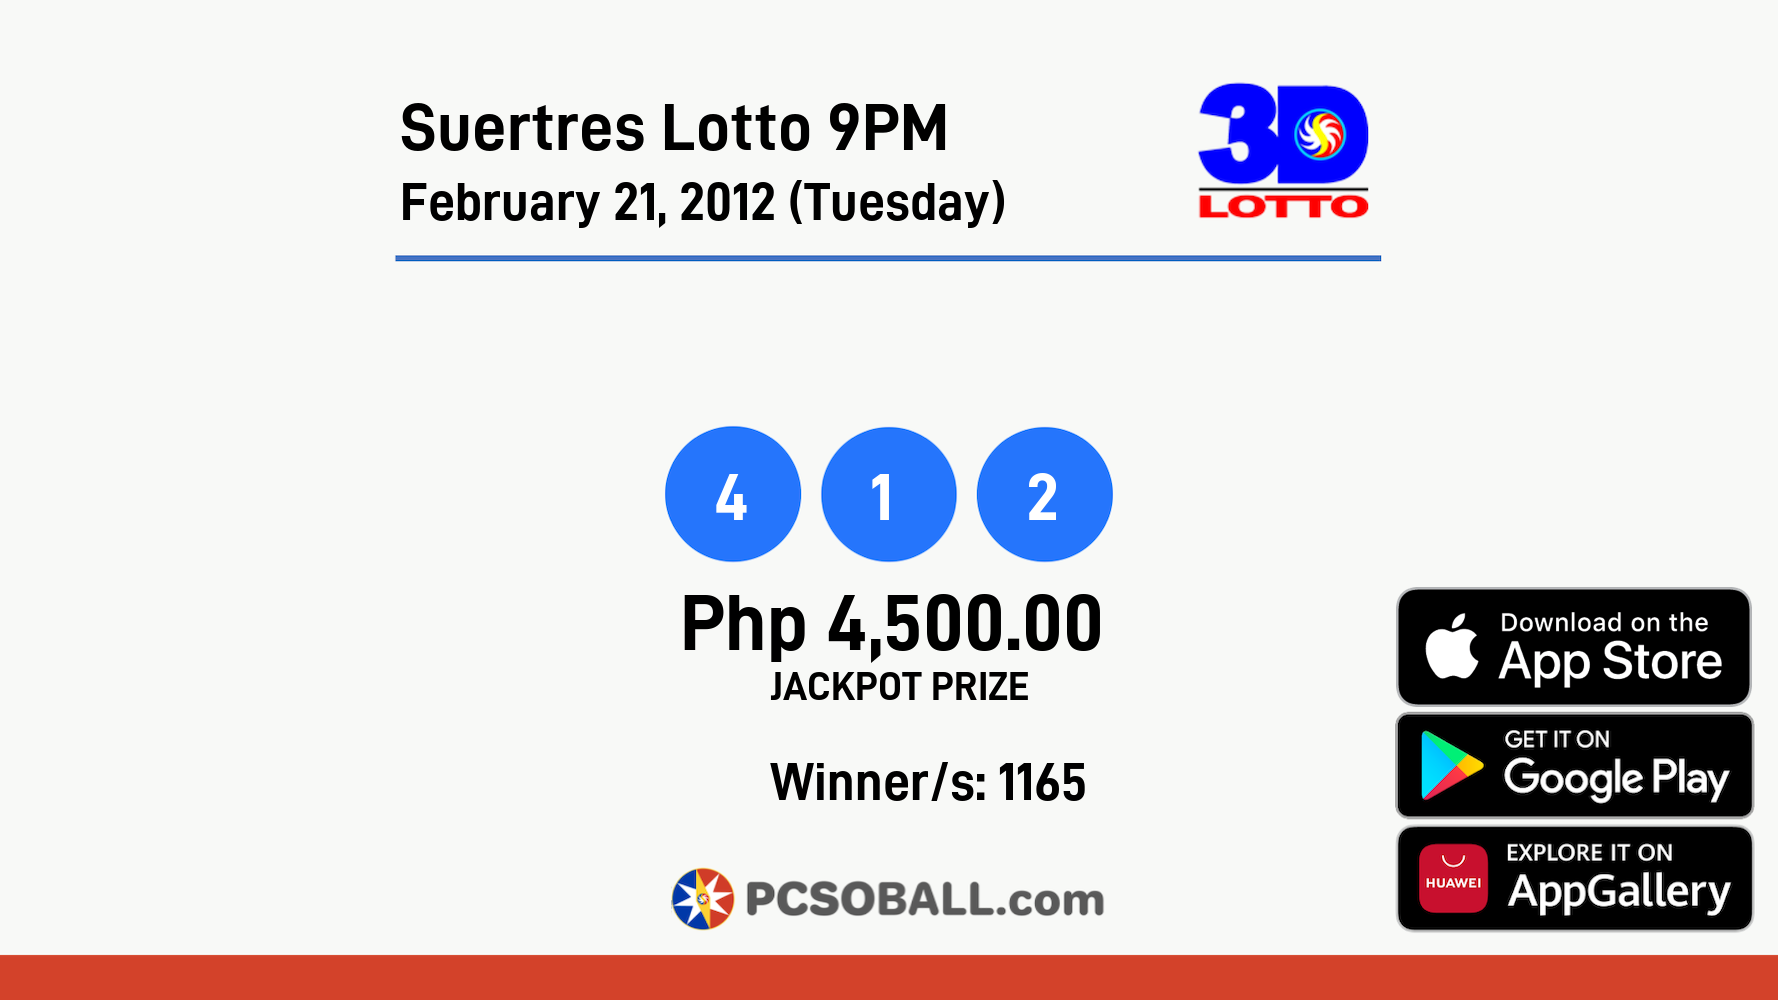 Suertres Lotto 9PM February 21, 2012 (Tuesday) Result